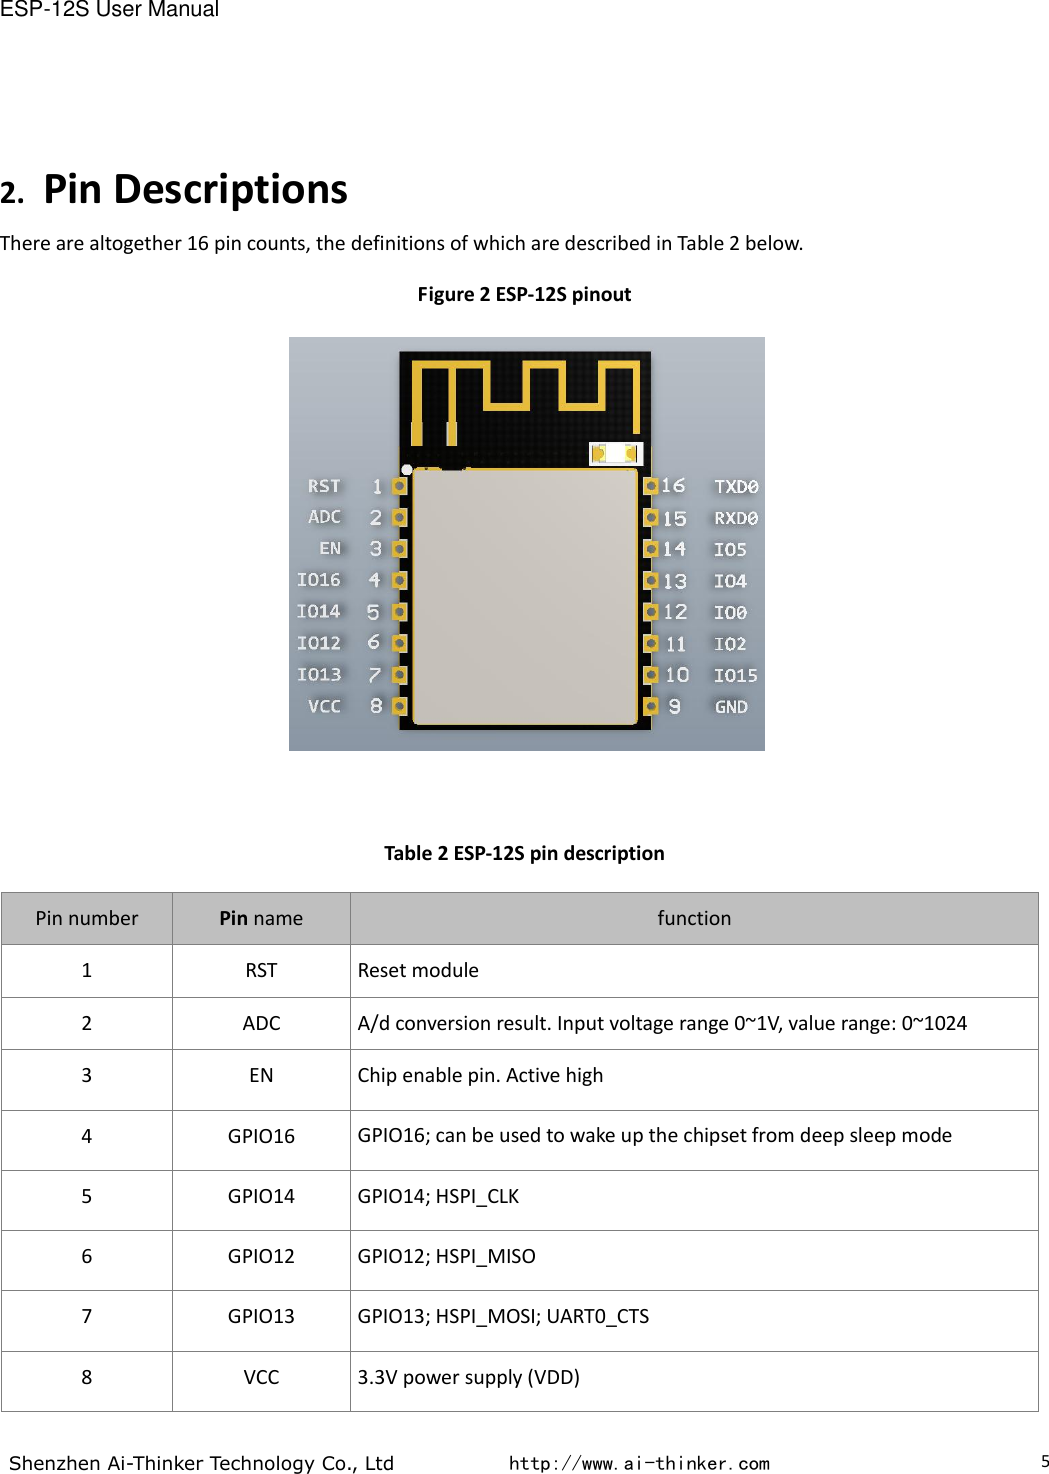 ESP-12S User Manual  Shenzhen Ai-Thinker Technology Co., Ltd           http://www.ai-thinker.com                                                                                     5 2. Pin Descriptions There are altogether 16 pin counts, the definitions of which are described in Table 2 below. Figure 2 ESP-12S pinout   Table 2 ESP-12S pin description Pin number Pin name function 1 RST Reset module 2 ADC A/d conversion result. Input voltage range 0~1V, value range: 0~1024 3 EN Chip enable pin. Active high 4 GPIO16 GPIO16; can be used to wake up the chipset from deep sleep mode 5 GPIO14 GPIO14; HSPI_CLK 6 GPIO12 GPIO12; HSPI_MISO 7 GPIO13 GPIO13; HSPI_MOSI; UART0_CTS 8 VCC 3.3V power supply (VDD) 